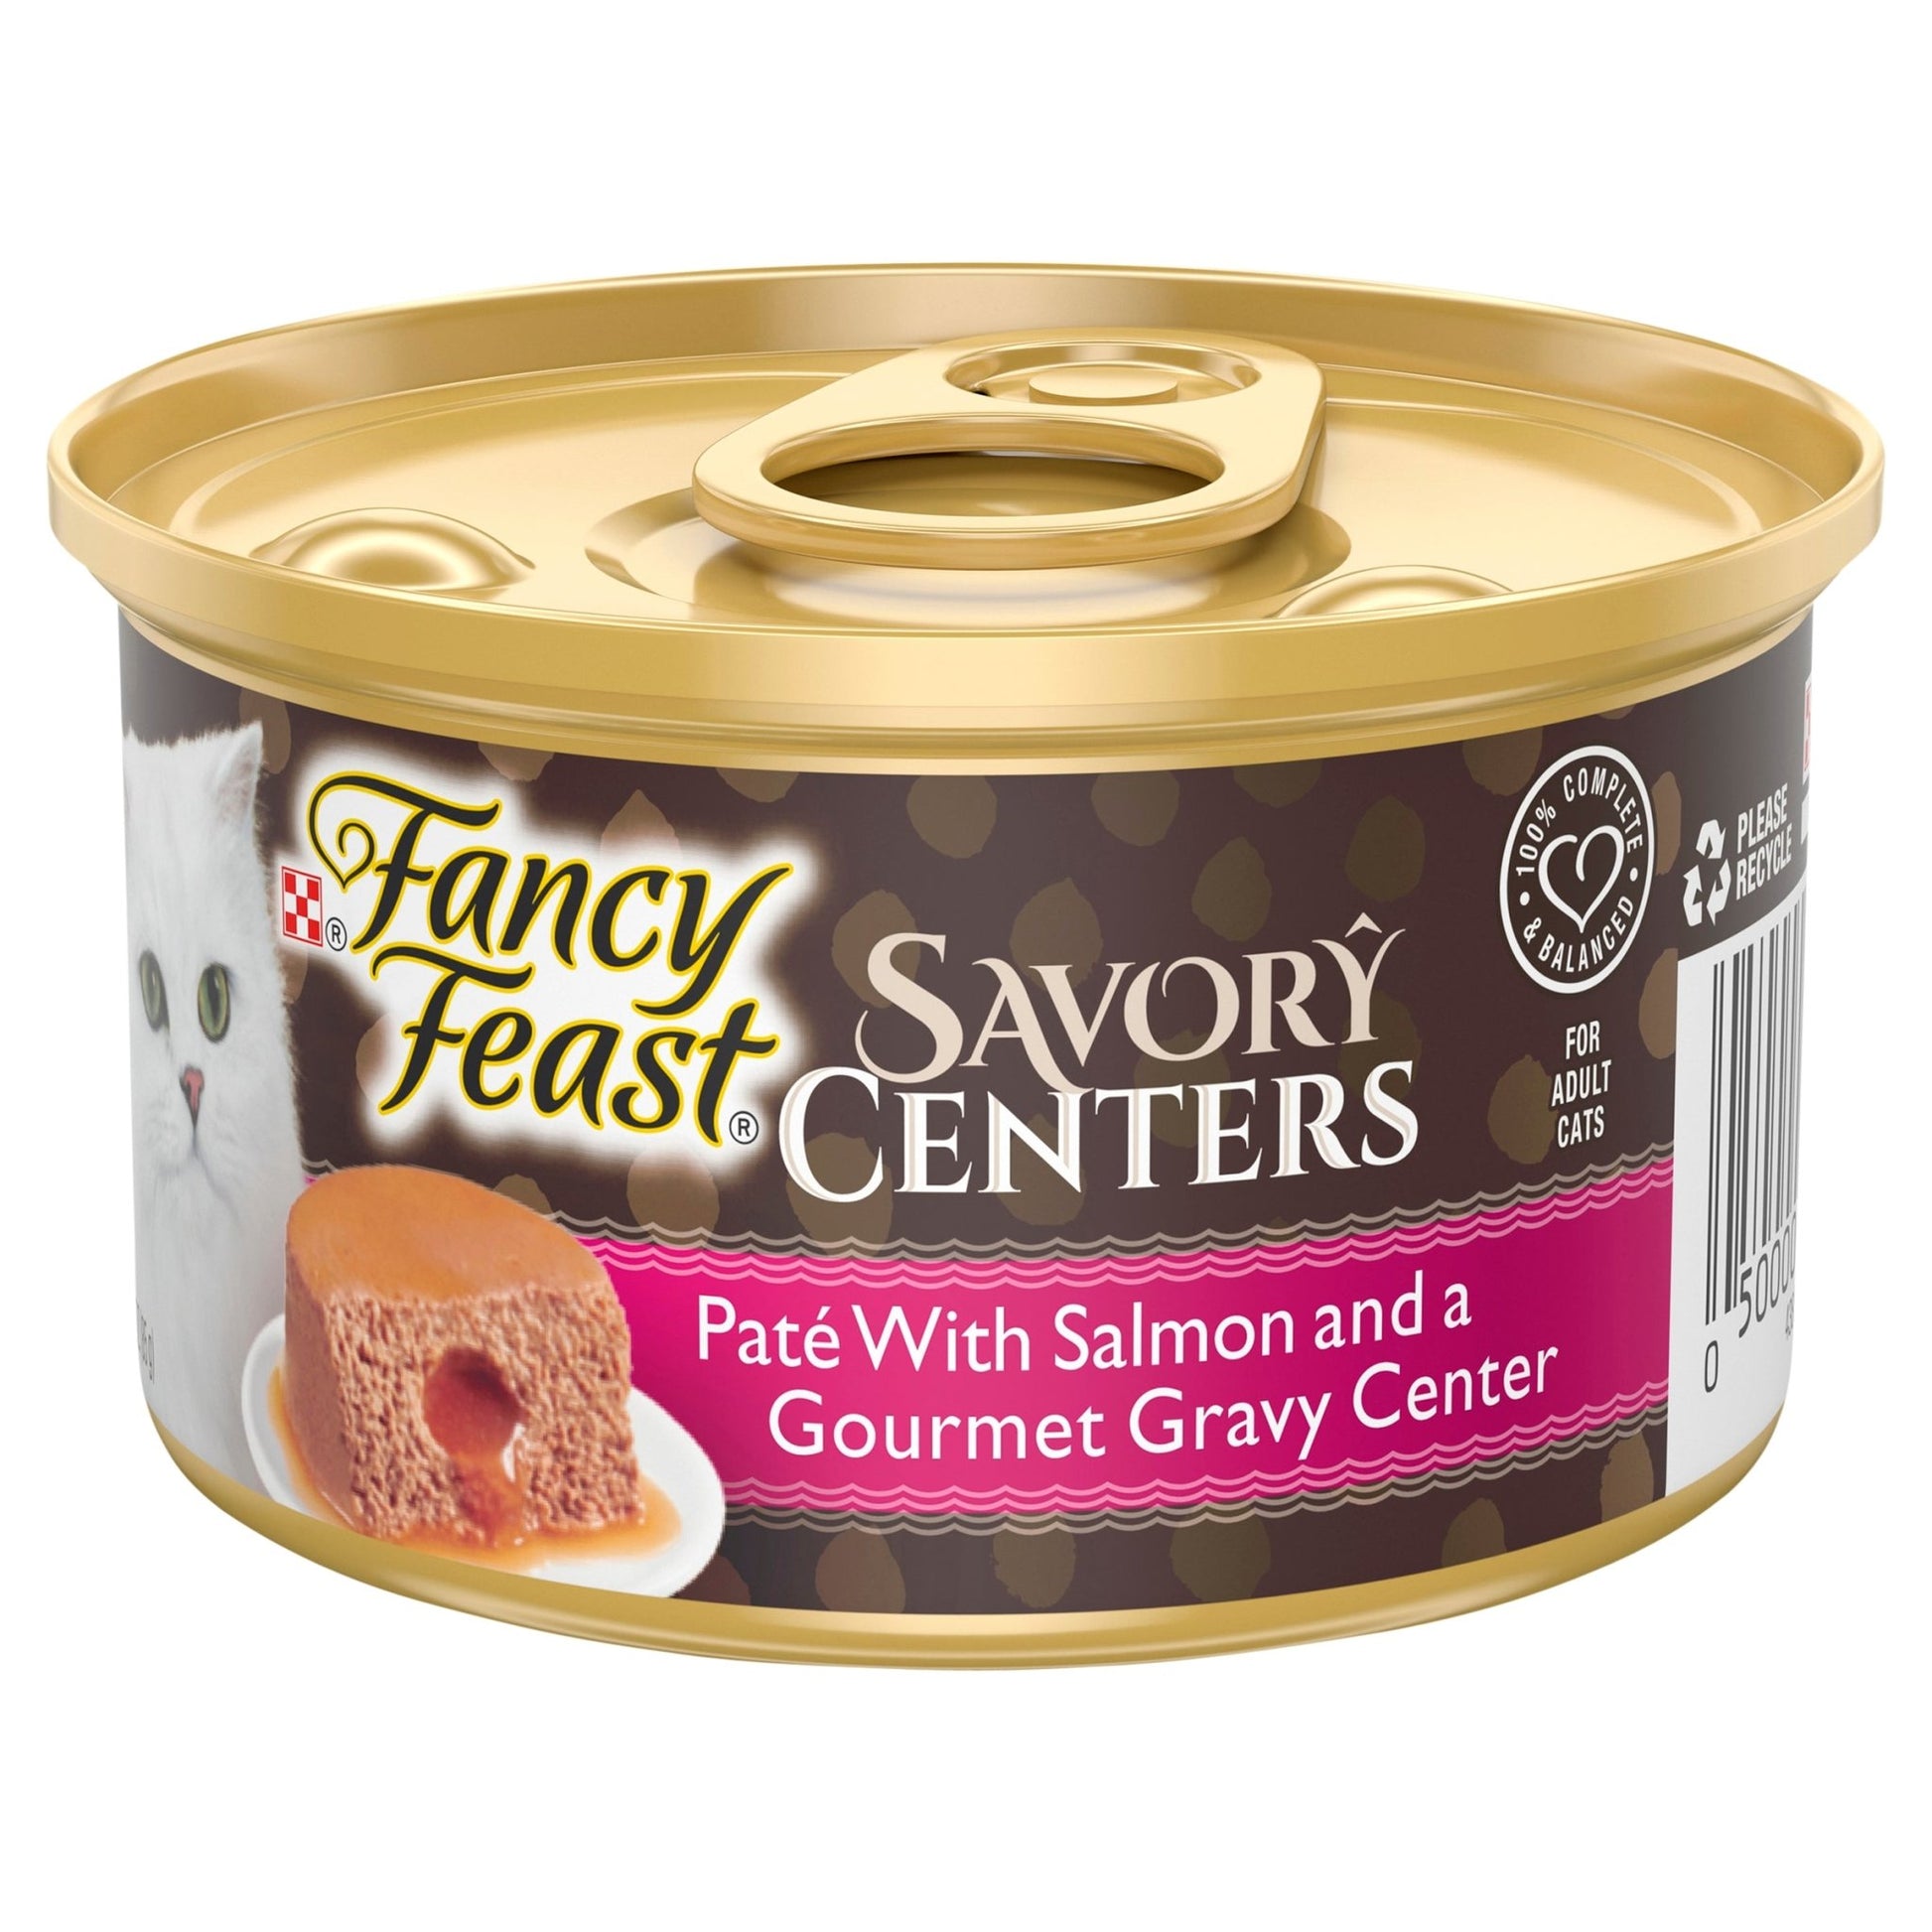 Fancy Feast Savory Centers Pate With Salmon and a Gourmet Gravy Center 24x85g - Woonona Petfood & Produce